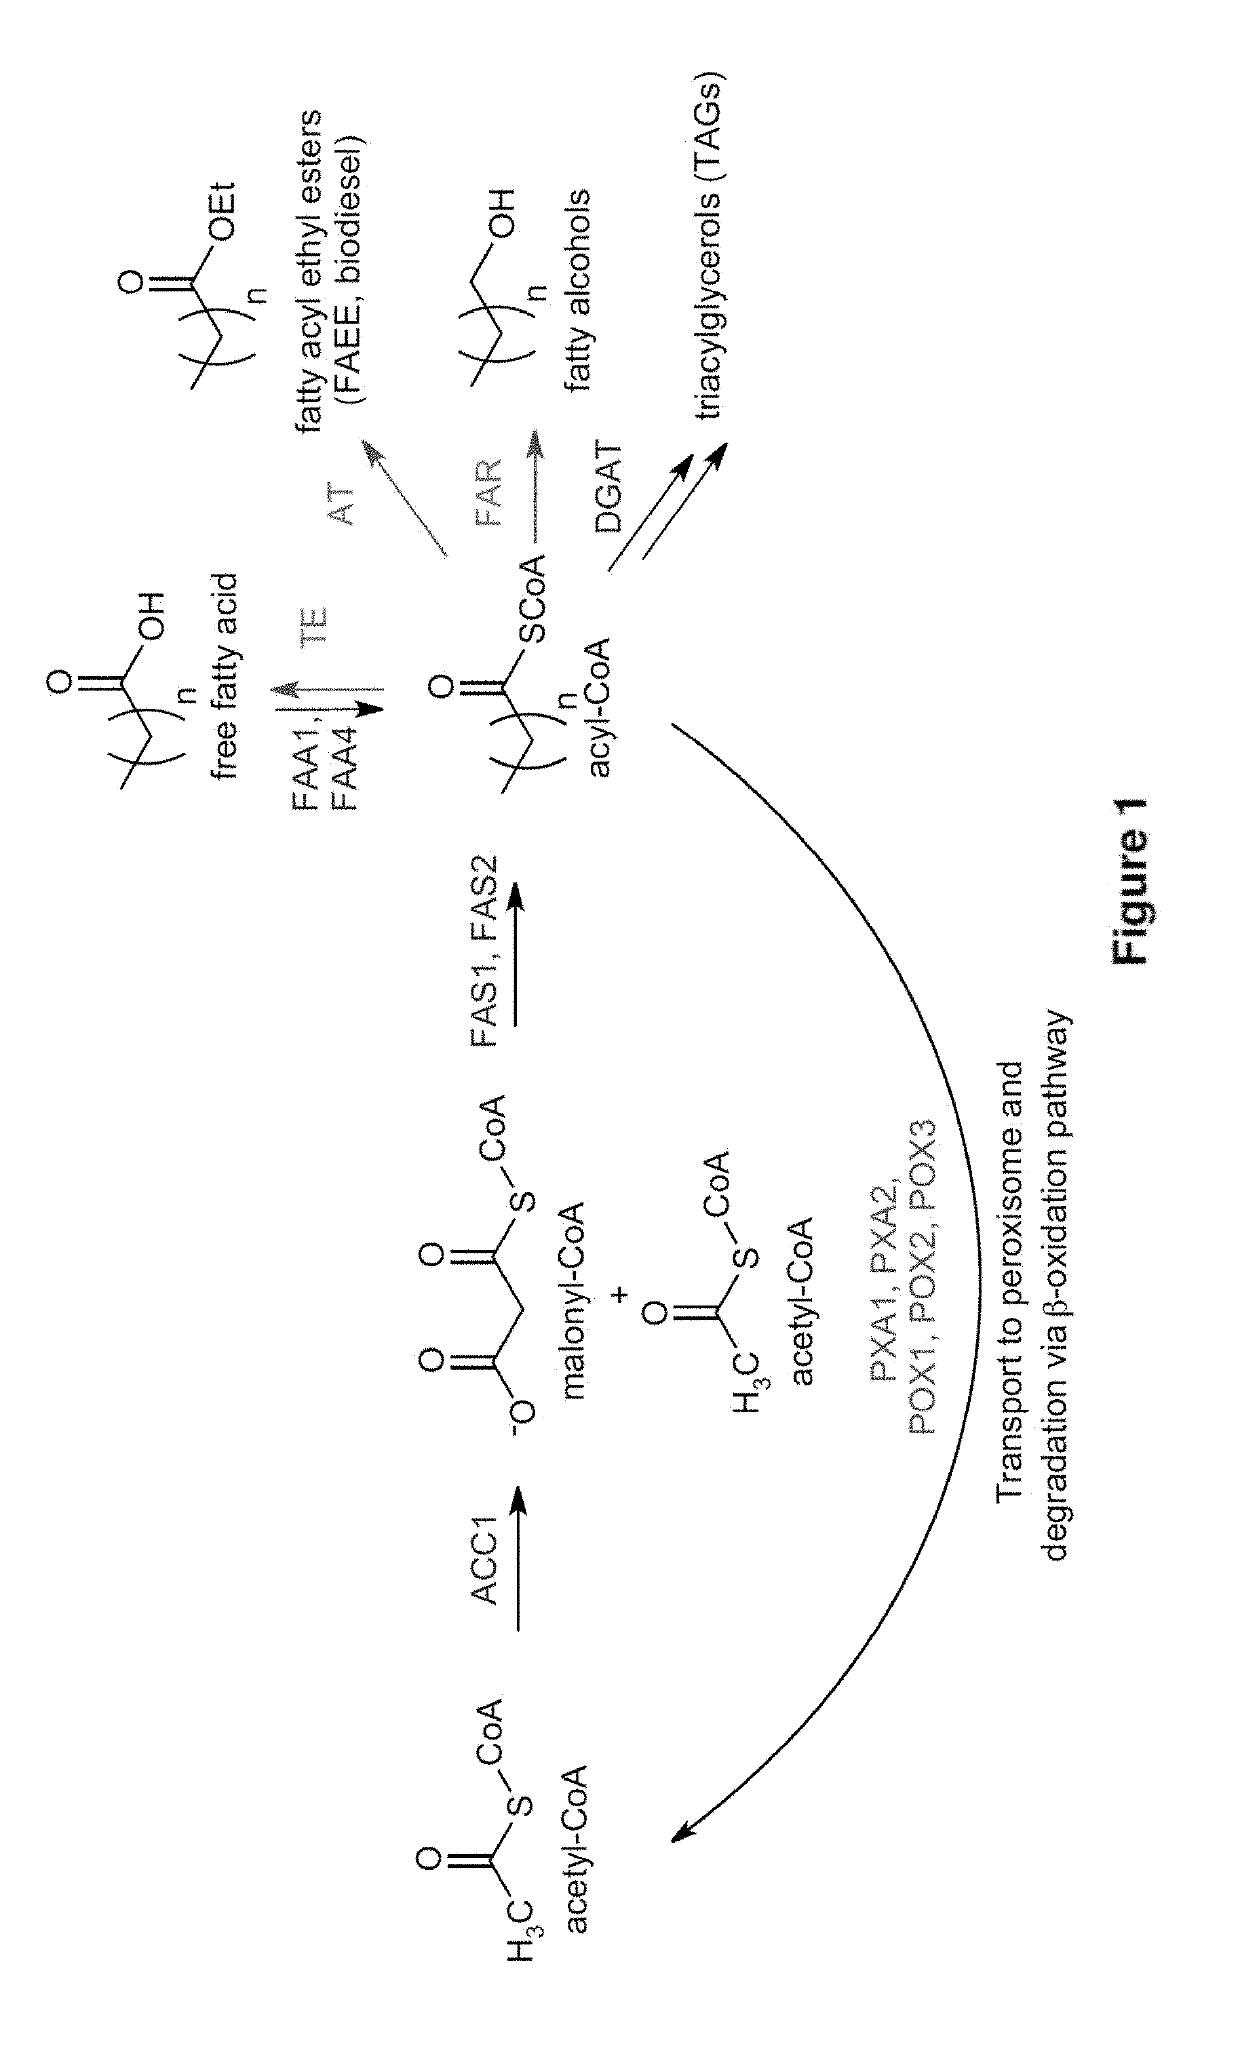 Yeast cell modified to overproduce fatty acid and fatty acid-derived compounds